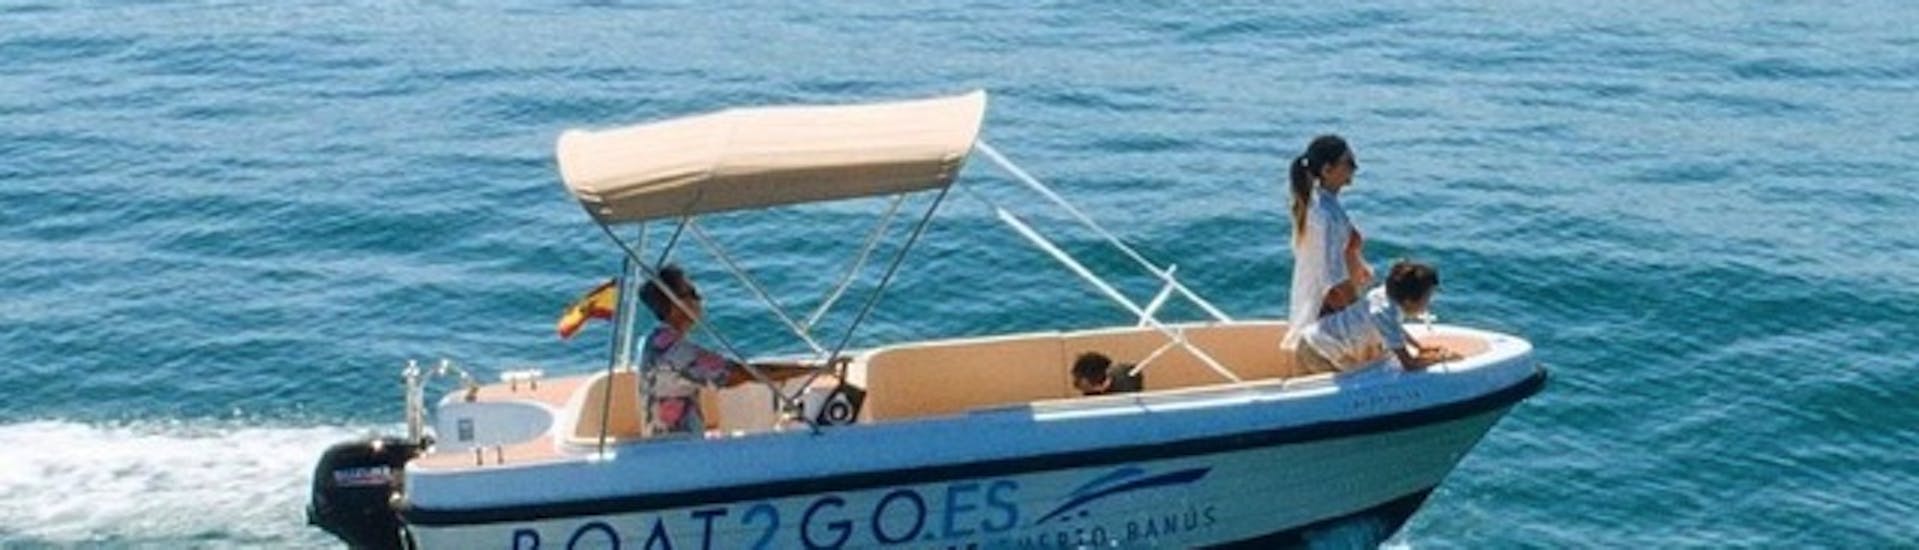 People enjoying the good weather during the Boat Rental in Puerto Banús, Marbella (up to 6 people).